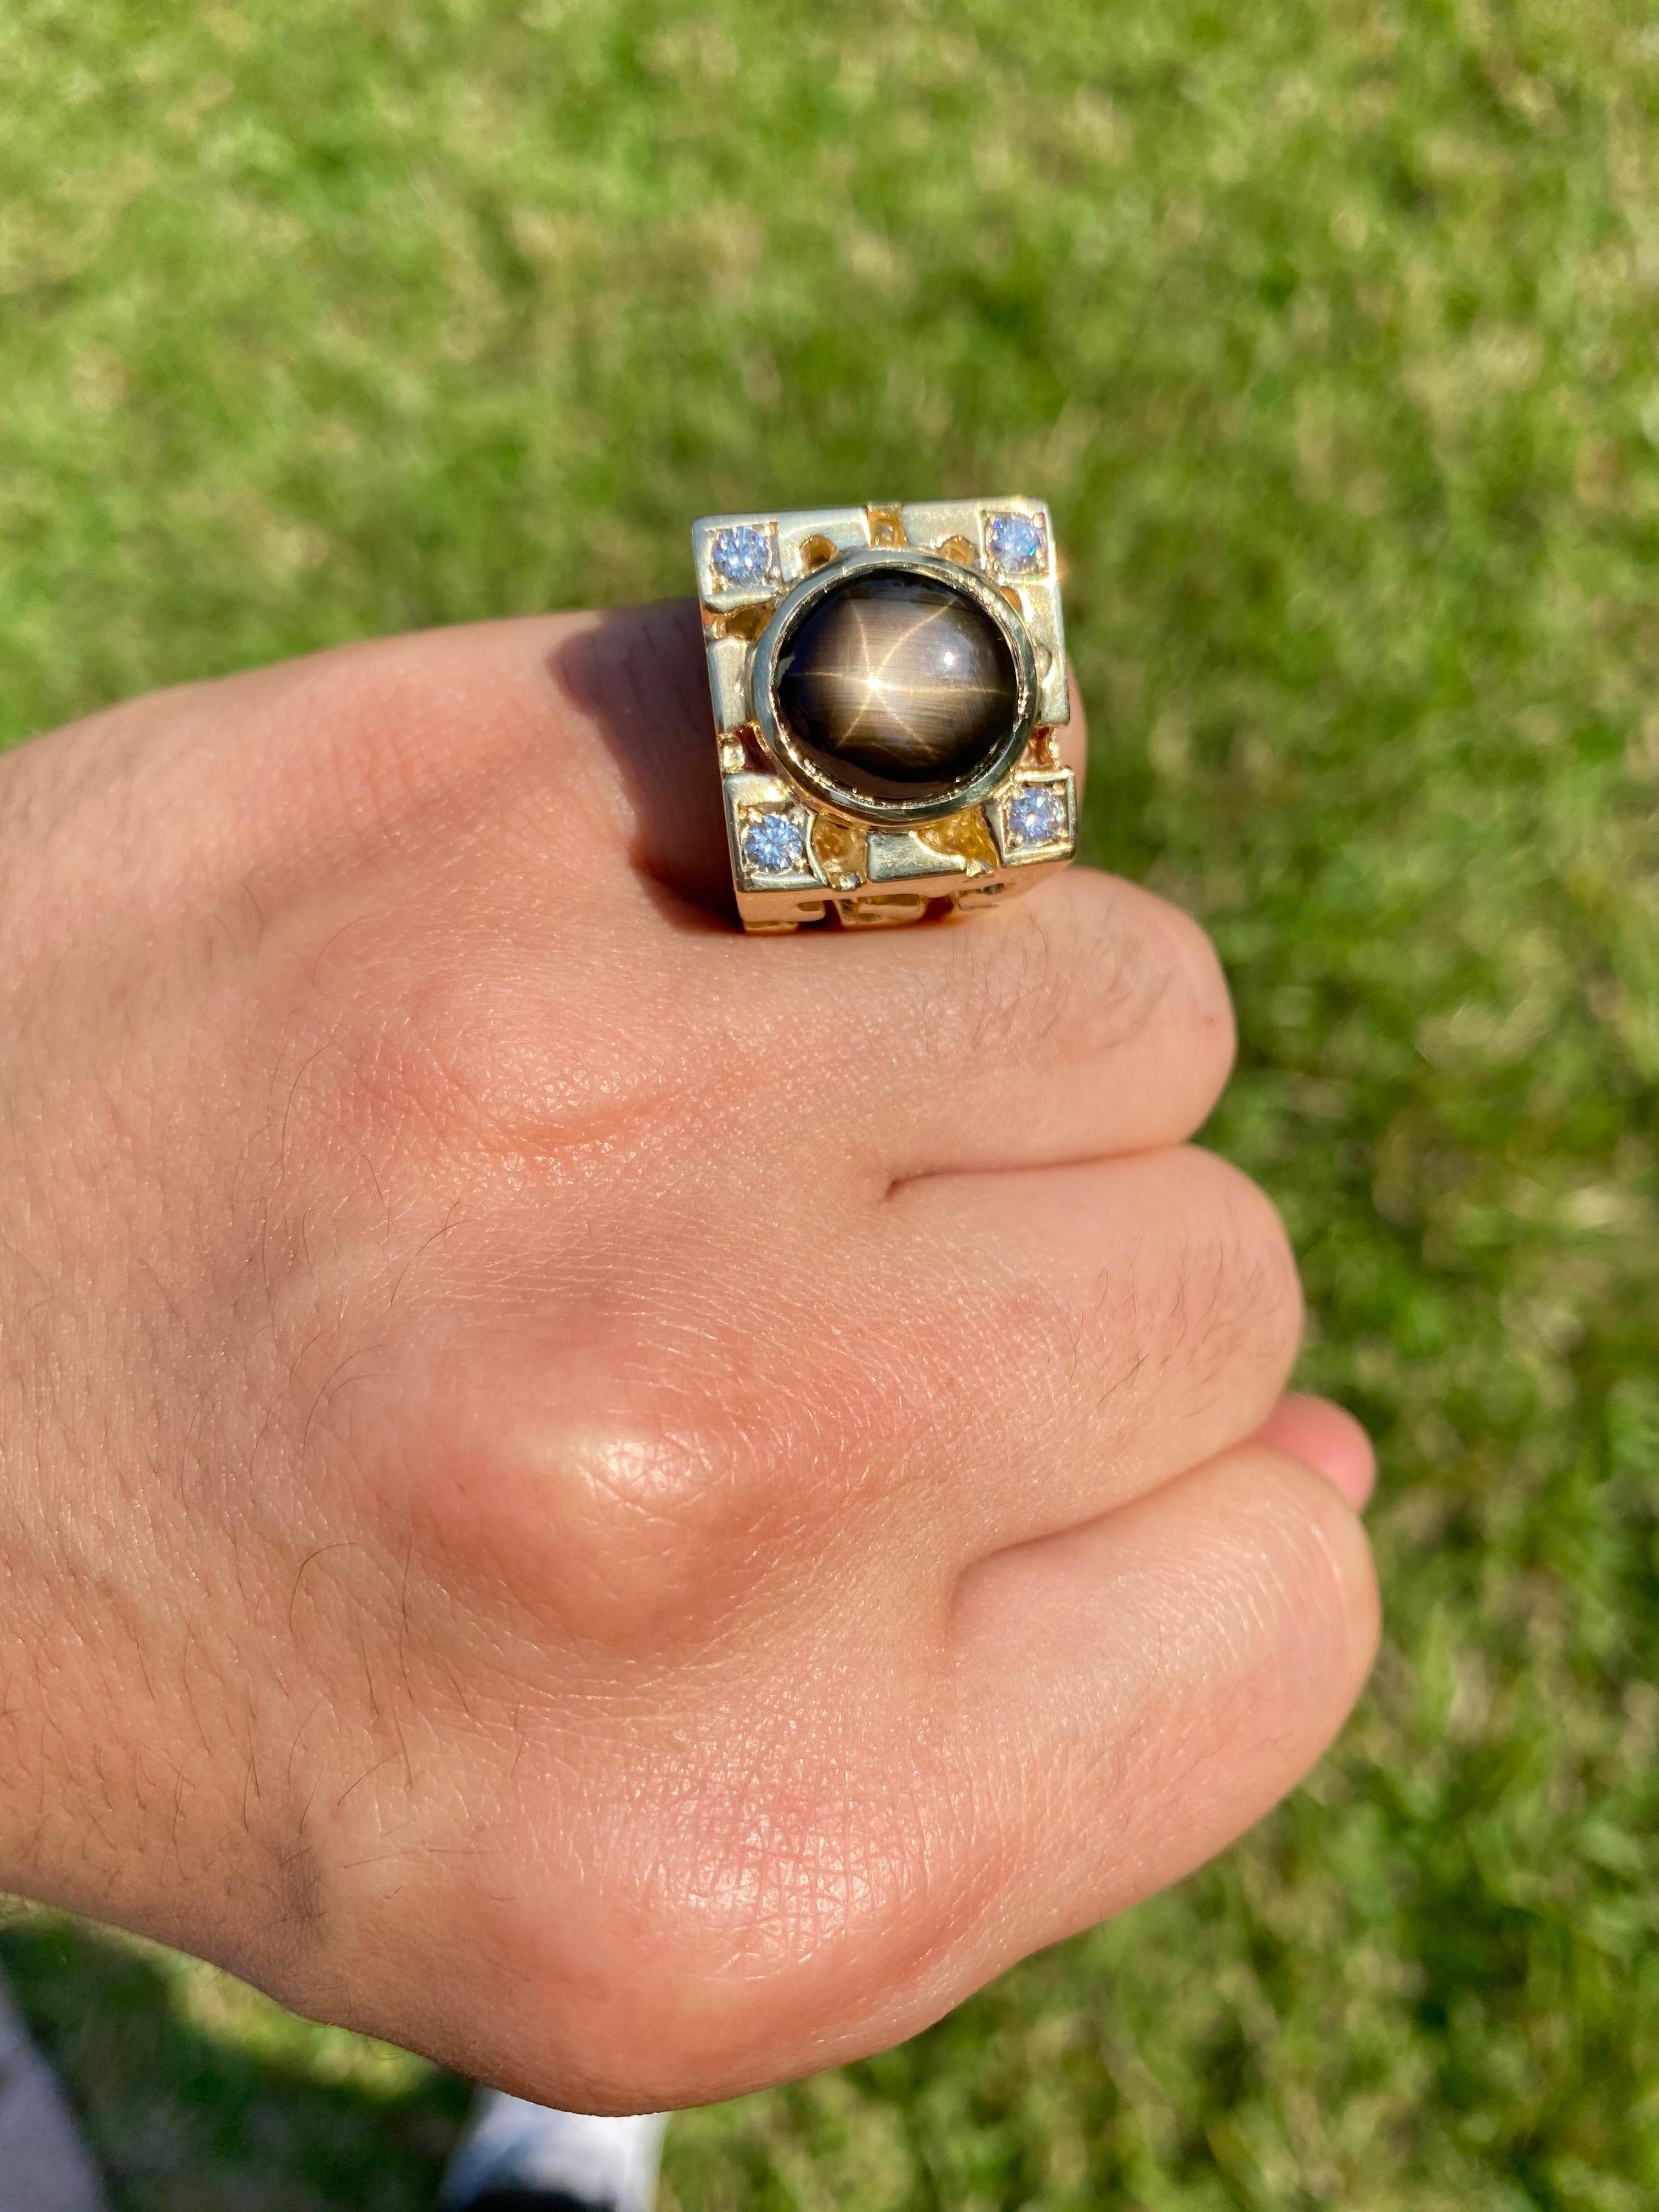 Gorgeous black star sapphire mens ring in textured 14k solid gold. The ring's design is extremely clever and executed to perfection. This ring design is known as a 